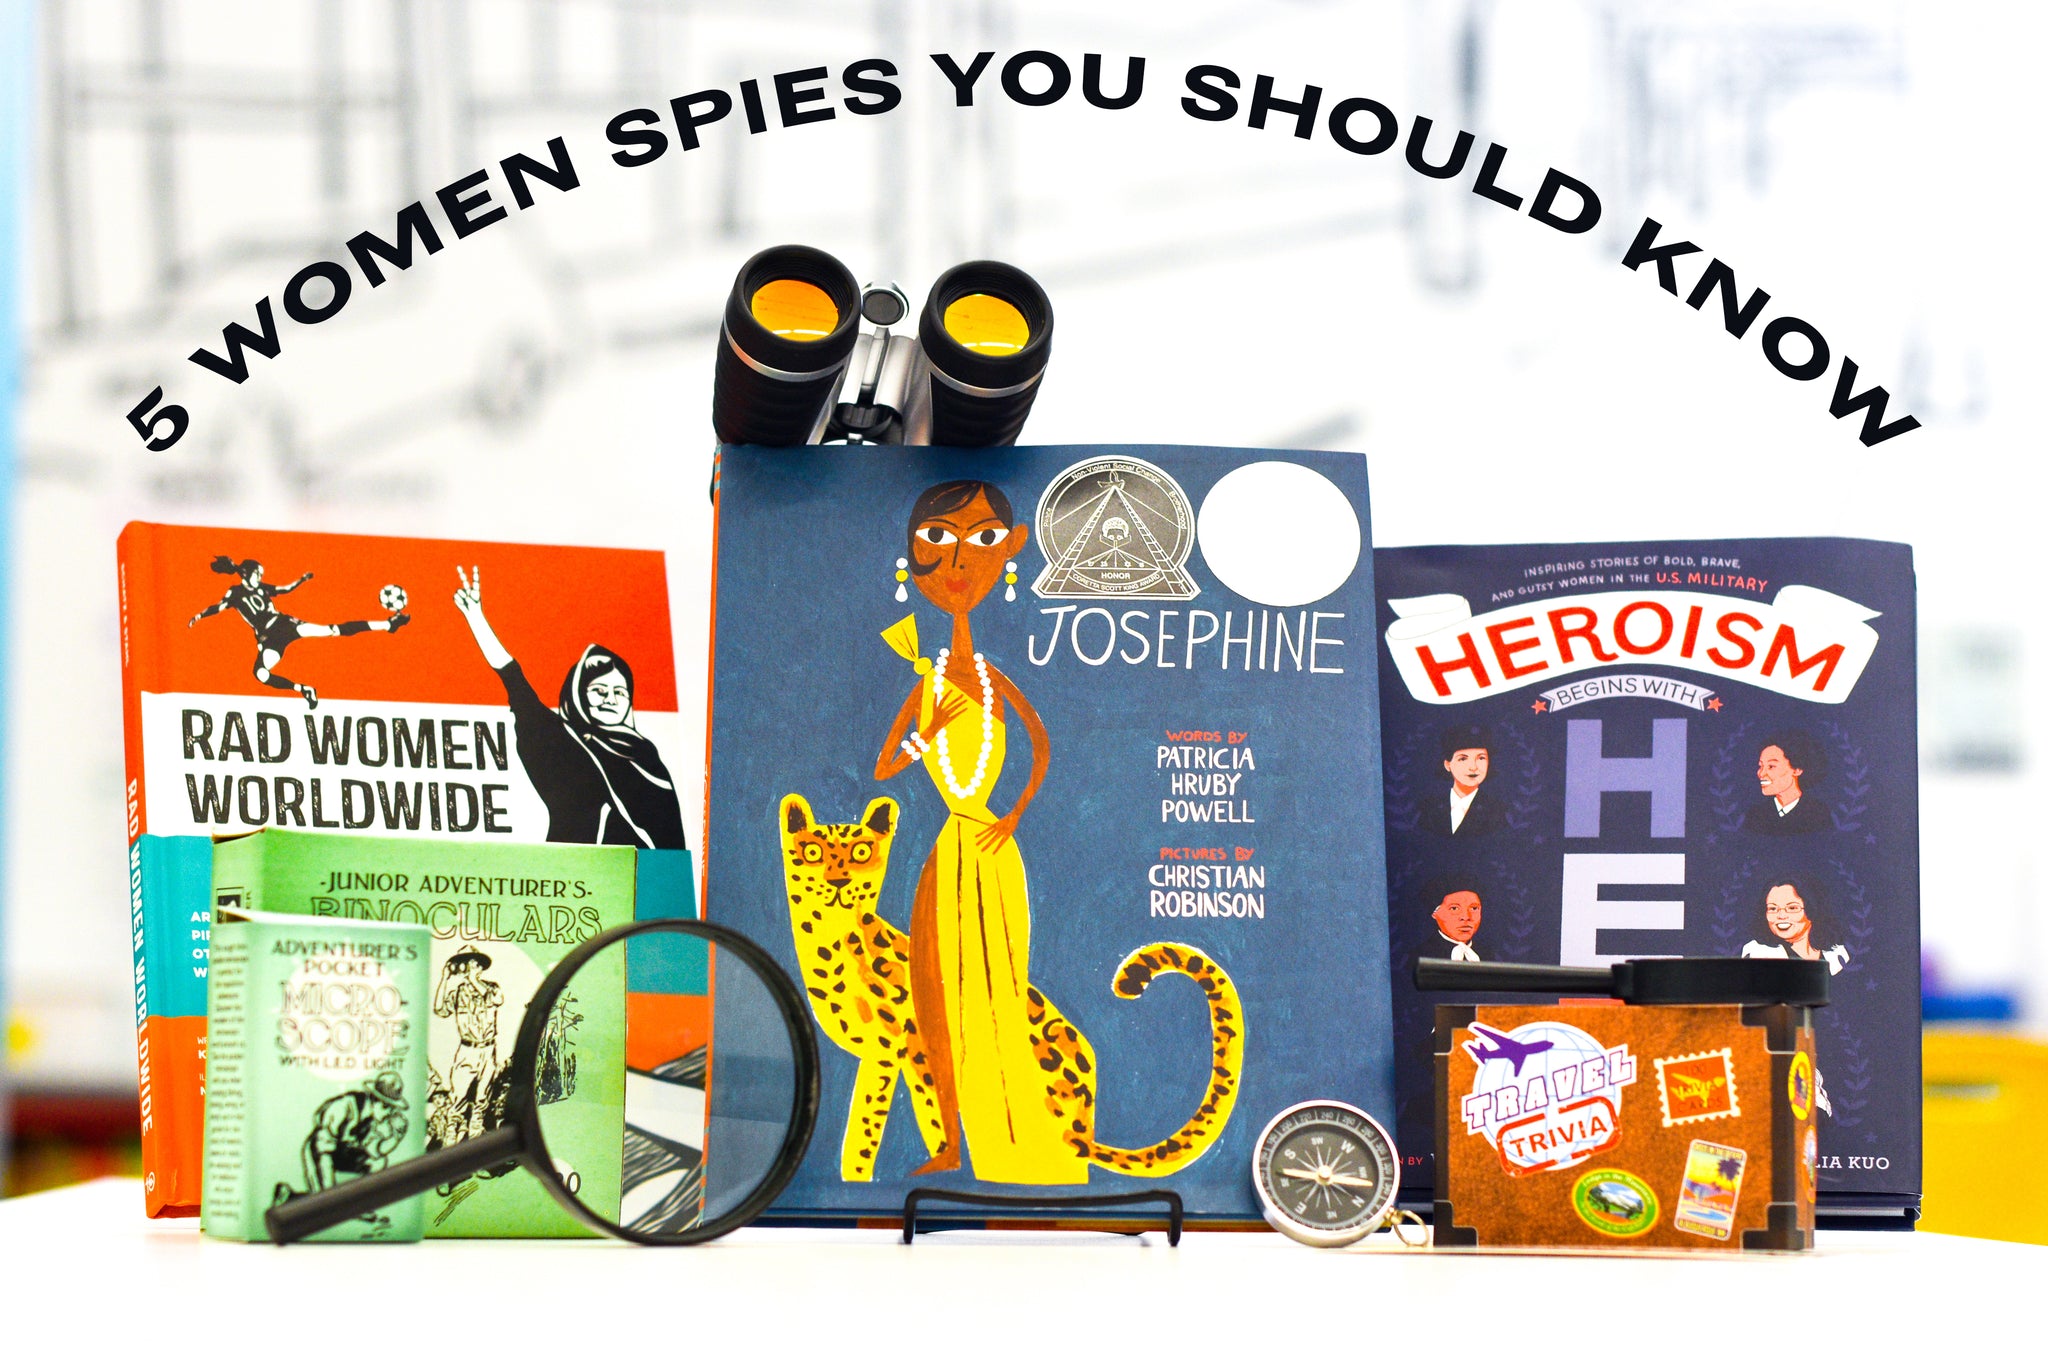 5 Women Spies You Should Know